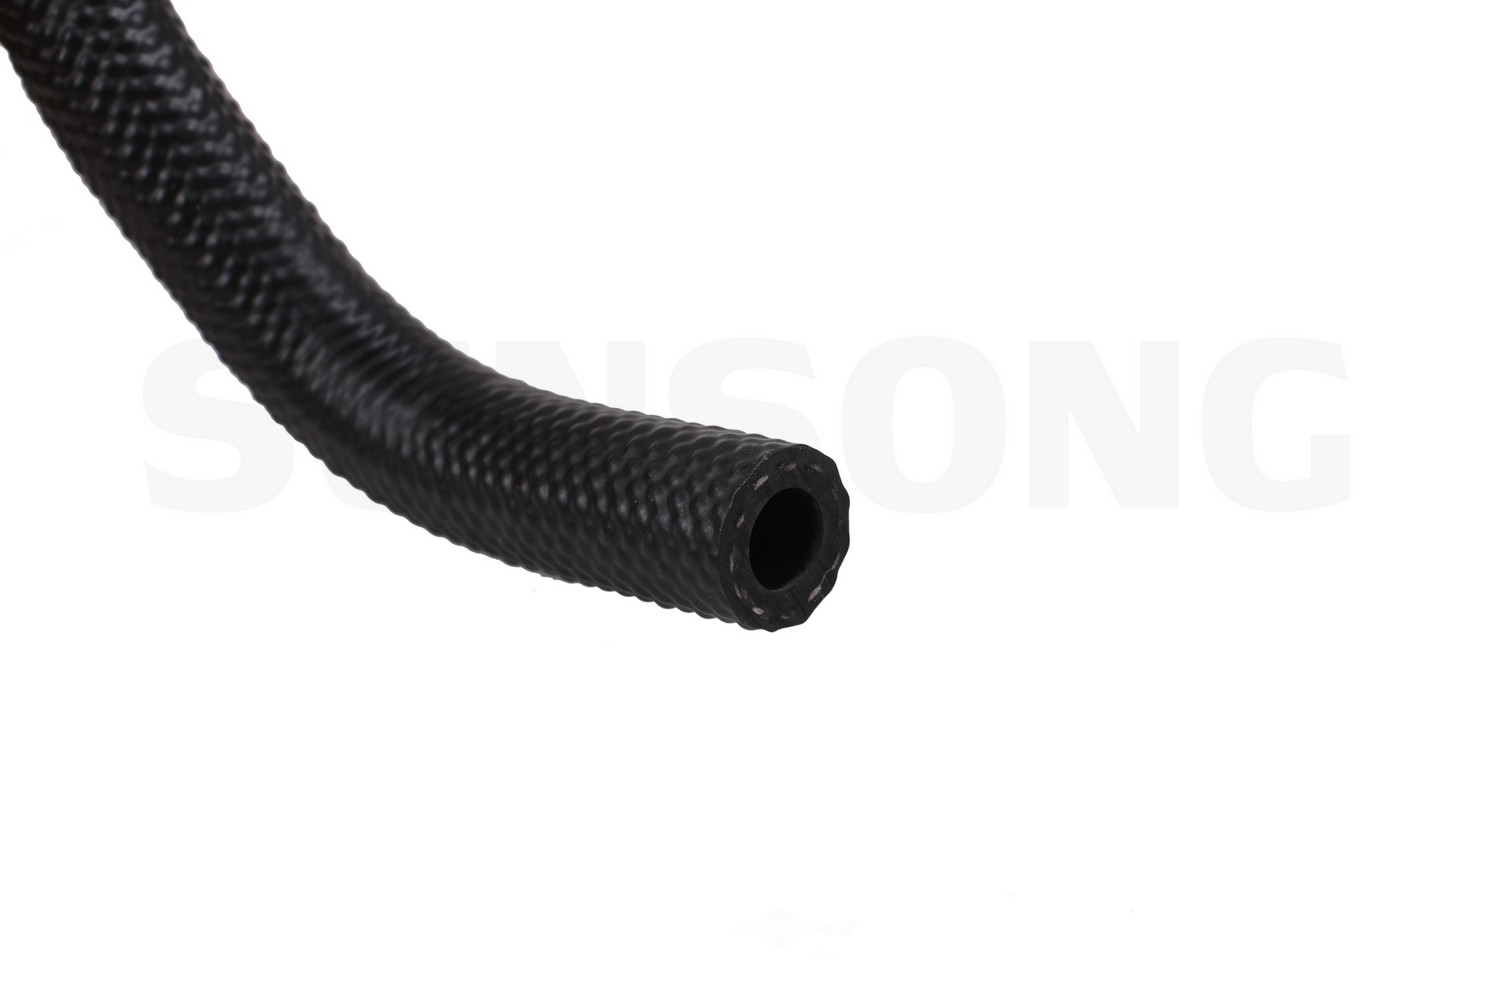 SUNSONG NORTH AMERICA - Power Steering Return Line Hose Assembly (To Reservoir) - SUG 3403736